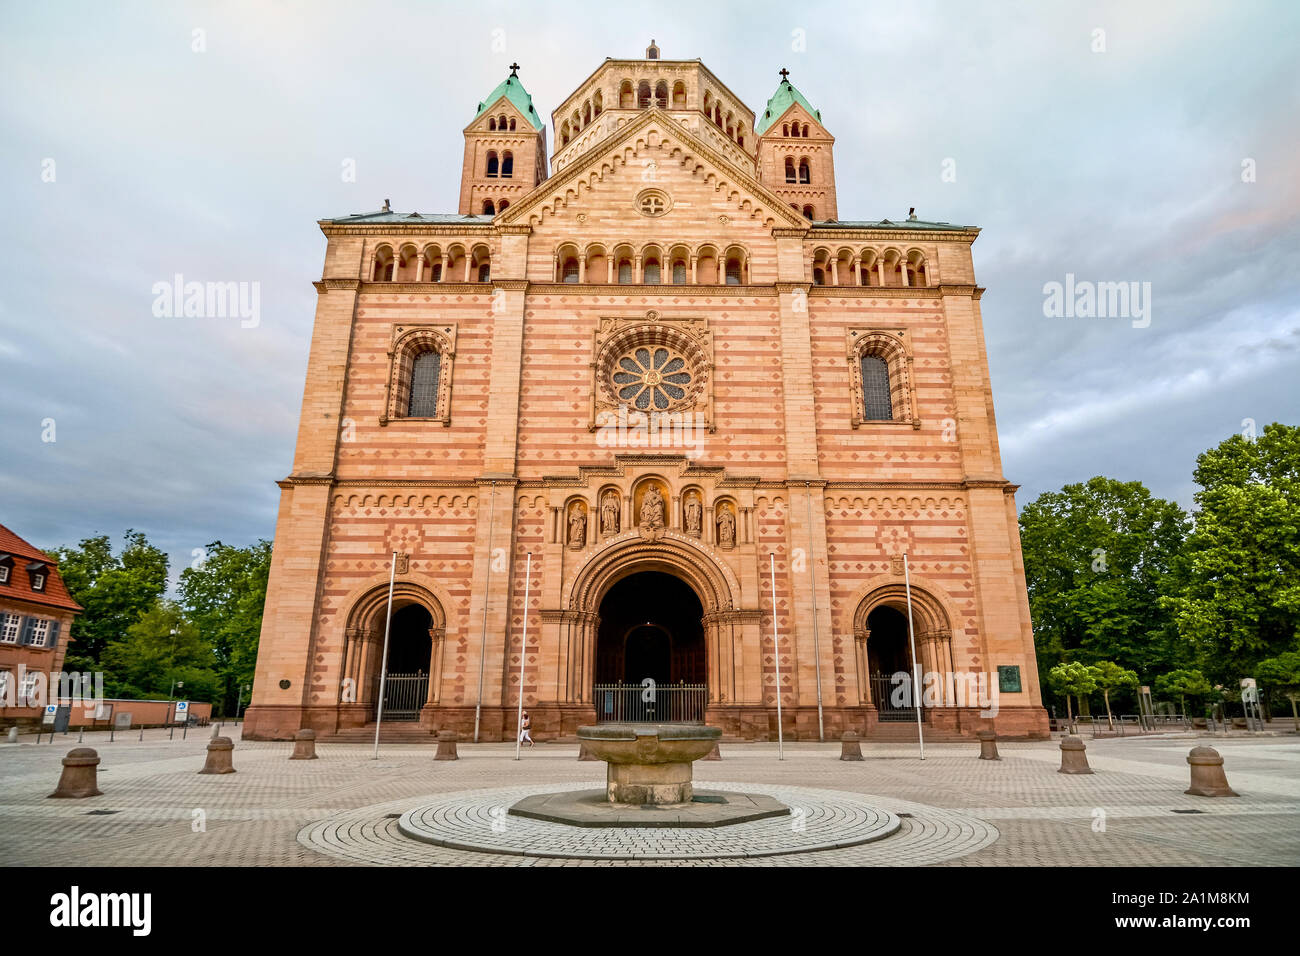 the Imperial Cathedral of Speyer at sunset, Germany Stock Photo